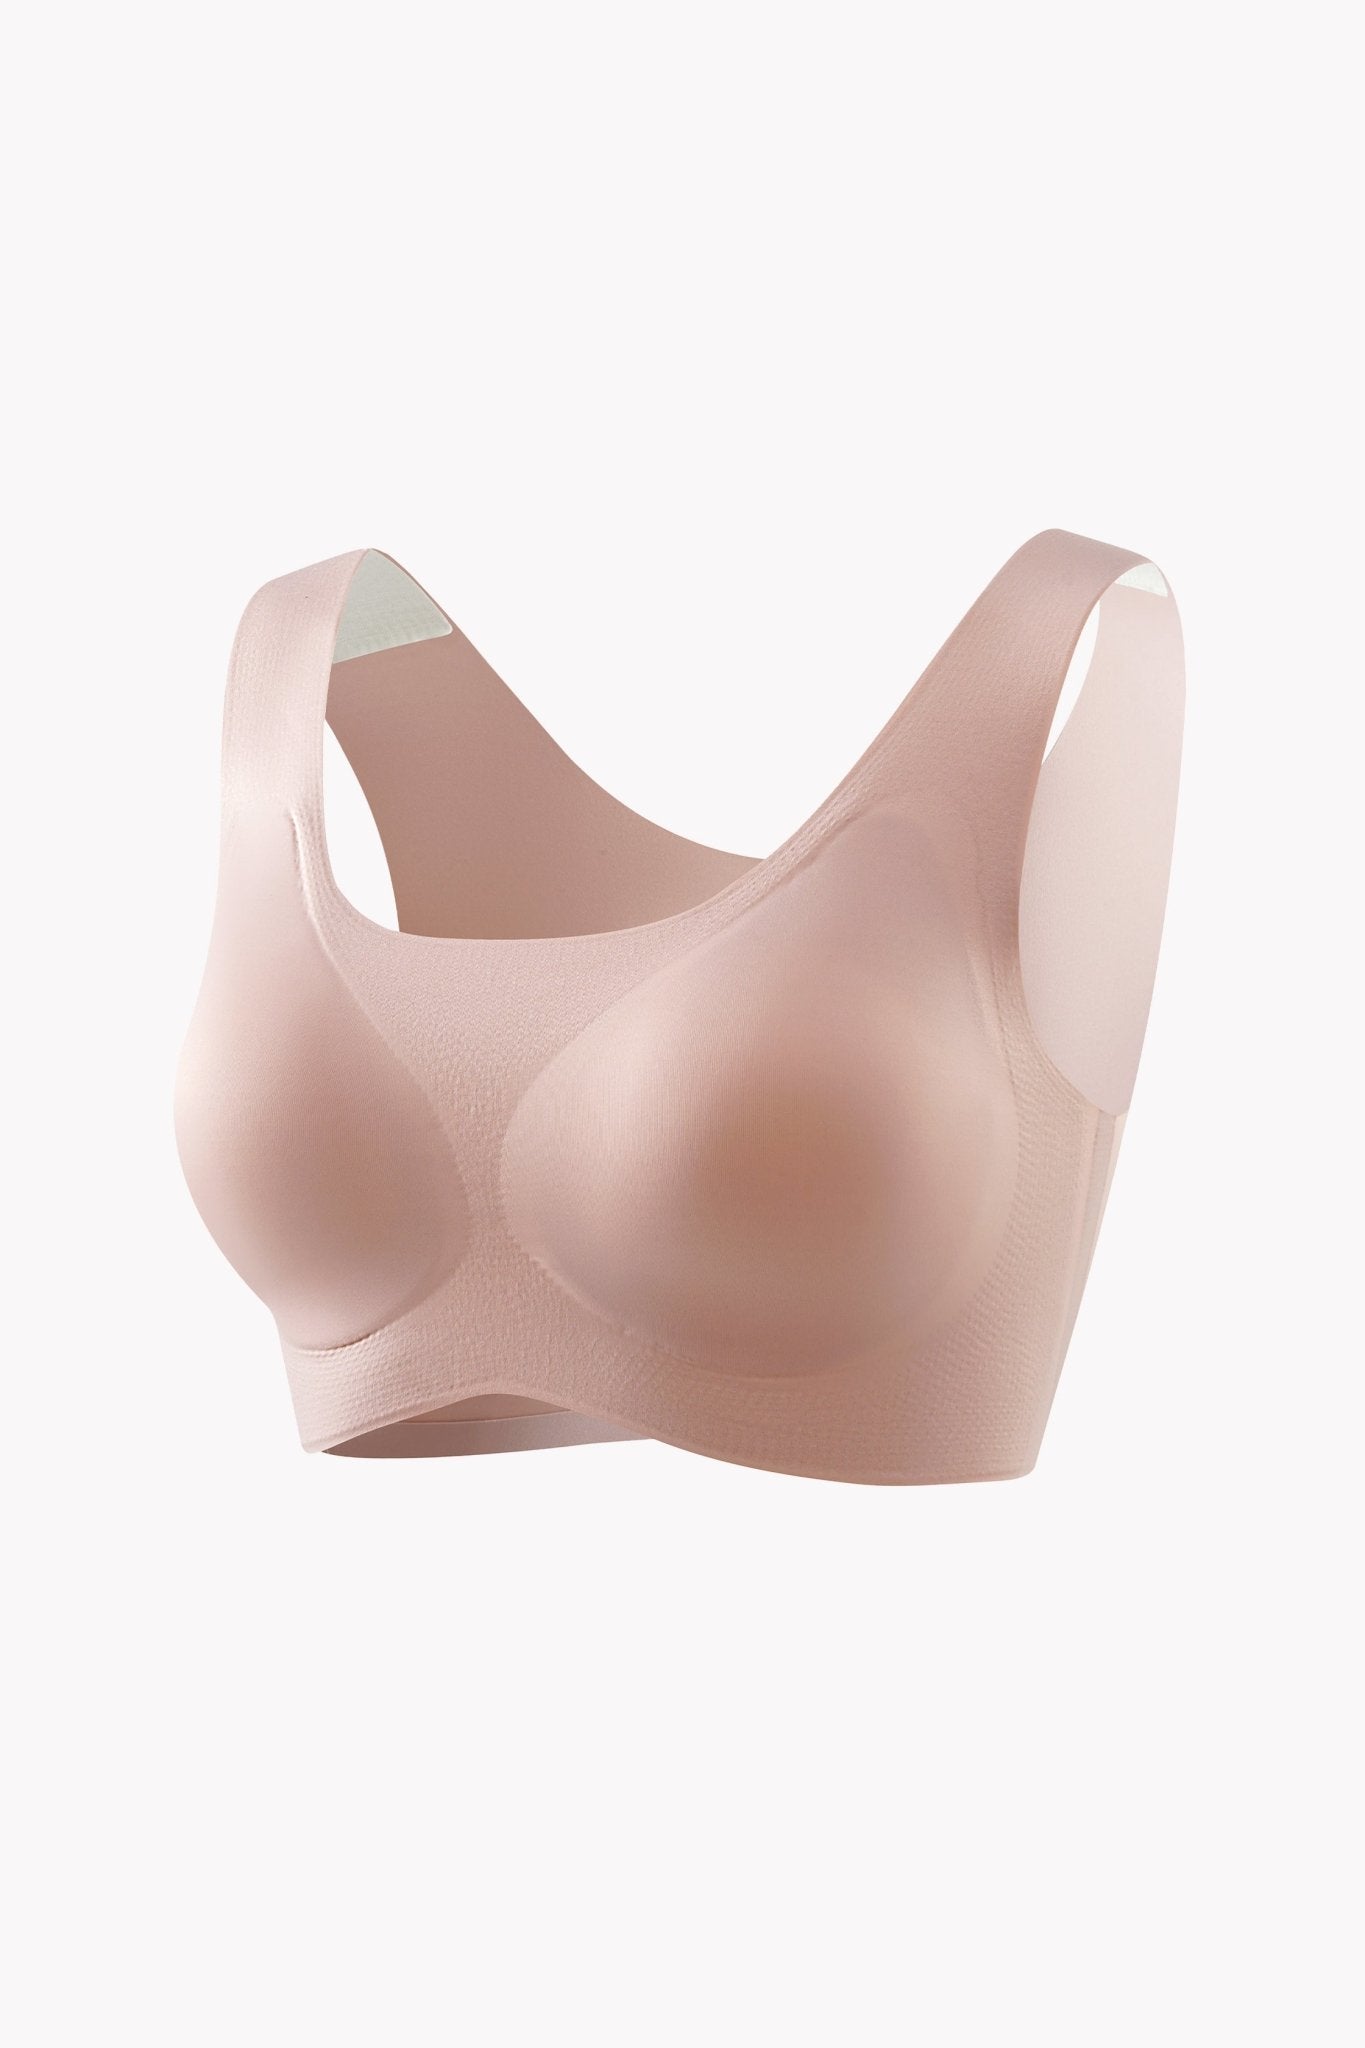 POSESHE Easy Pieces™️ Front Closure Push-Up Wire-Free Bra